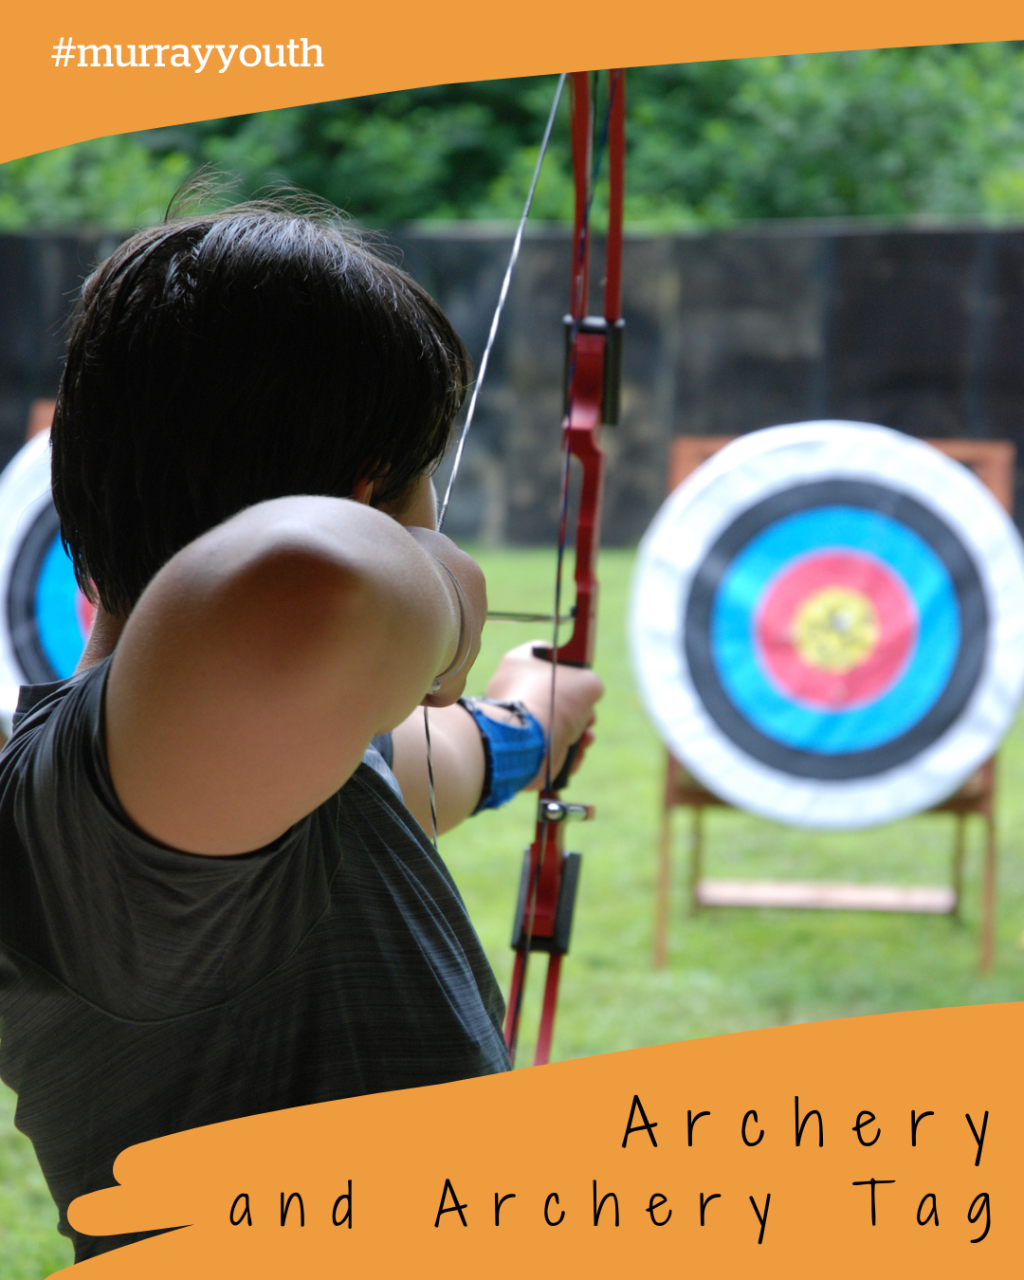 Youth Activity - Archery and Archery Tag (Ages 13 - 17)